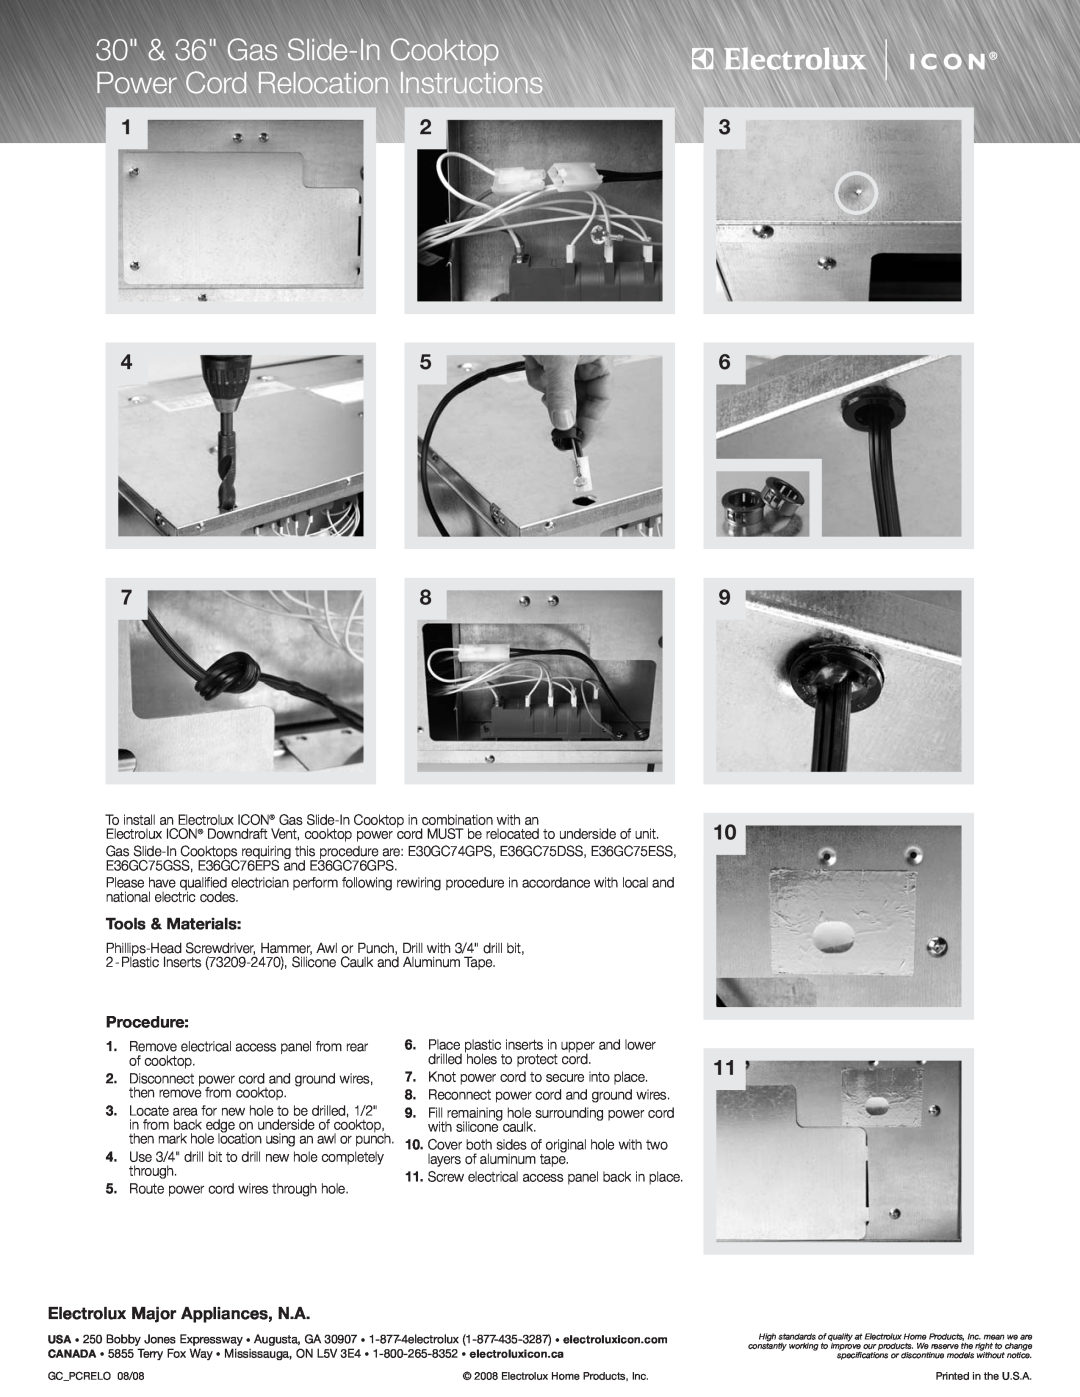 Electrolux E36EC75ESS Tools & Materials, Procedure, 30 & 36 Gas Slide-In Cooktop Power Cord Relocation Instructions 